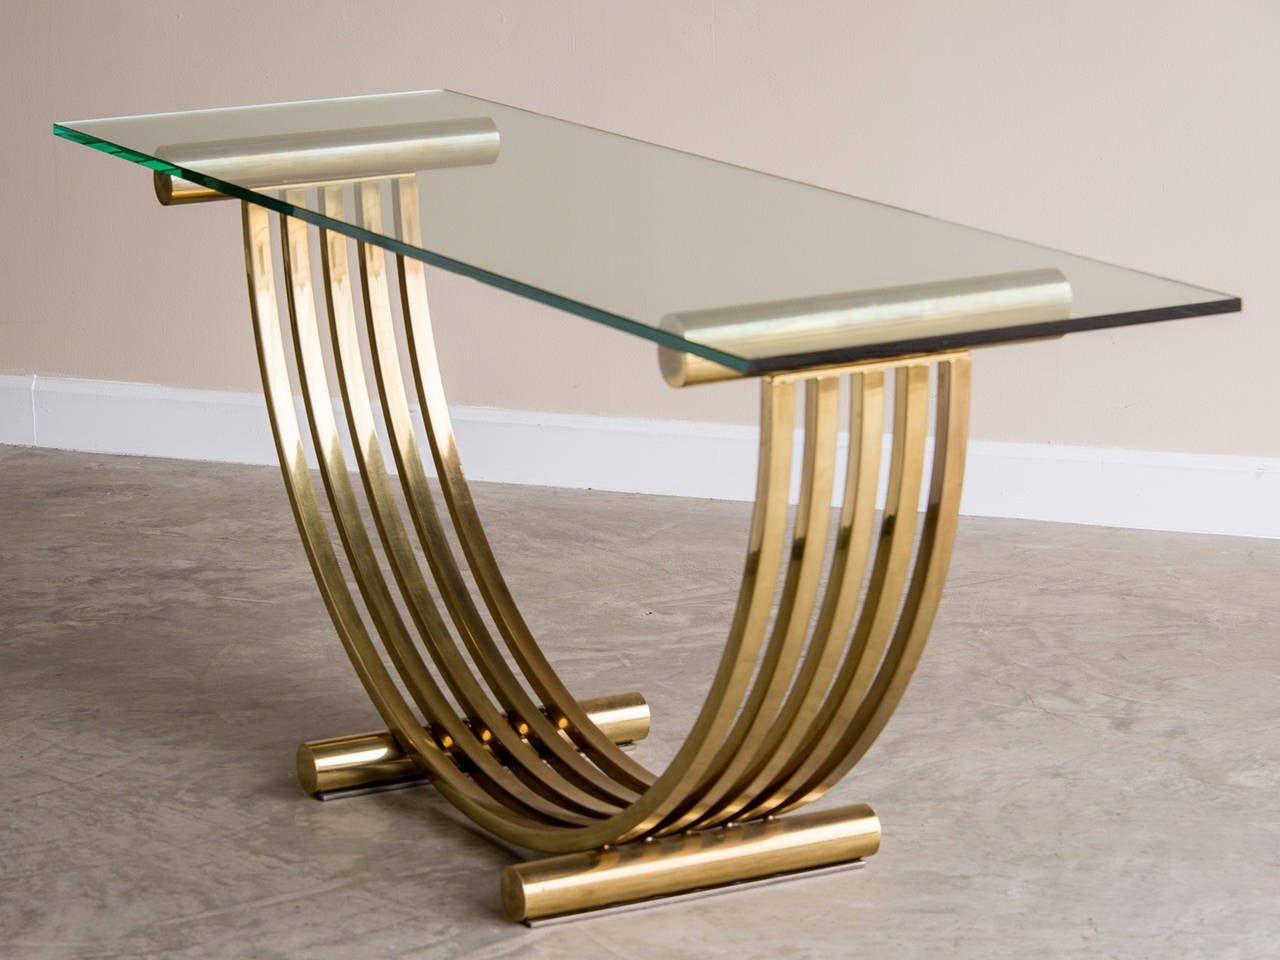 Romeo Rega Midcentury Modern Brass Glass Top Console Table, Italy Circa Regarding Brass Smoked Glass Console Tables (View 8 of 20)